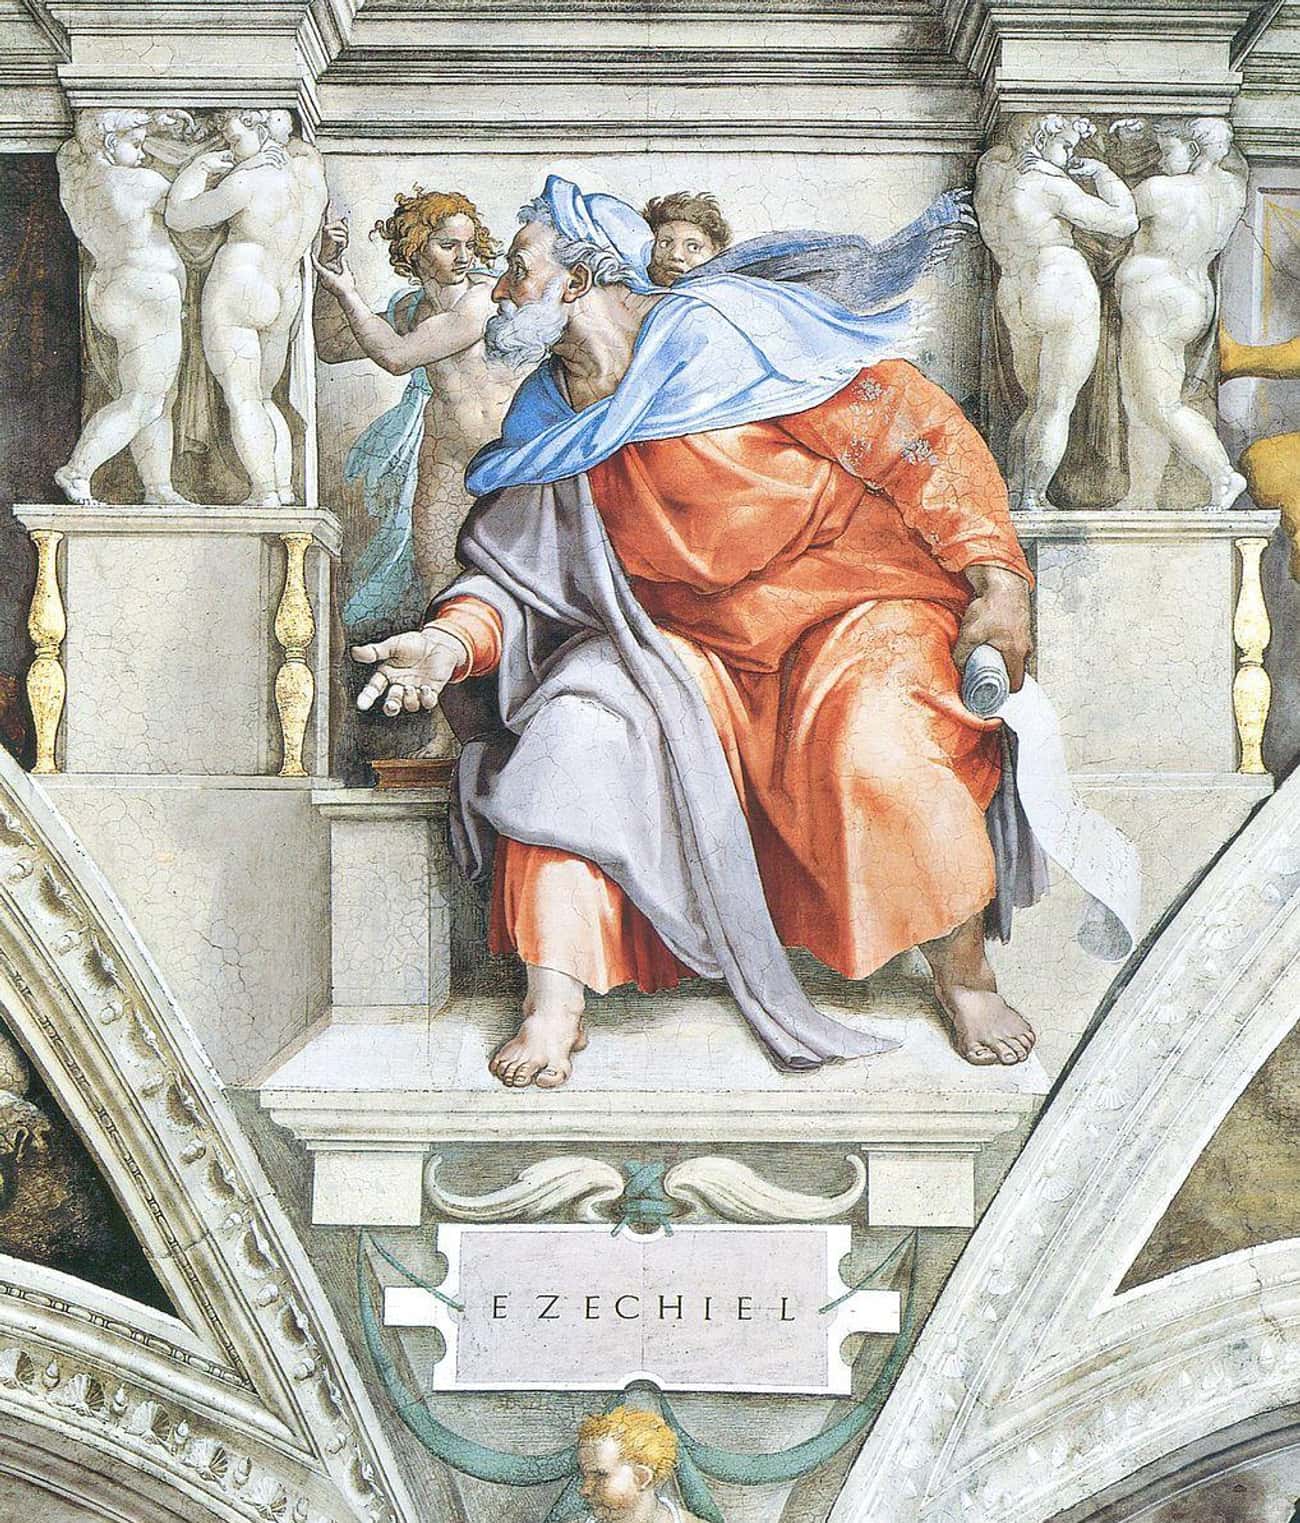 Michelangelo Painted The Ceiling On His Feet, Not His Back